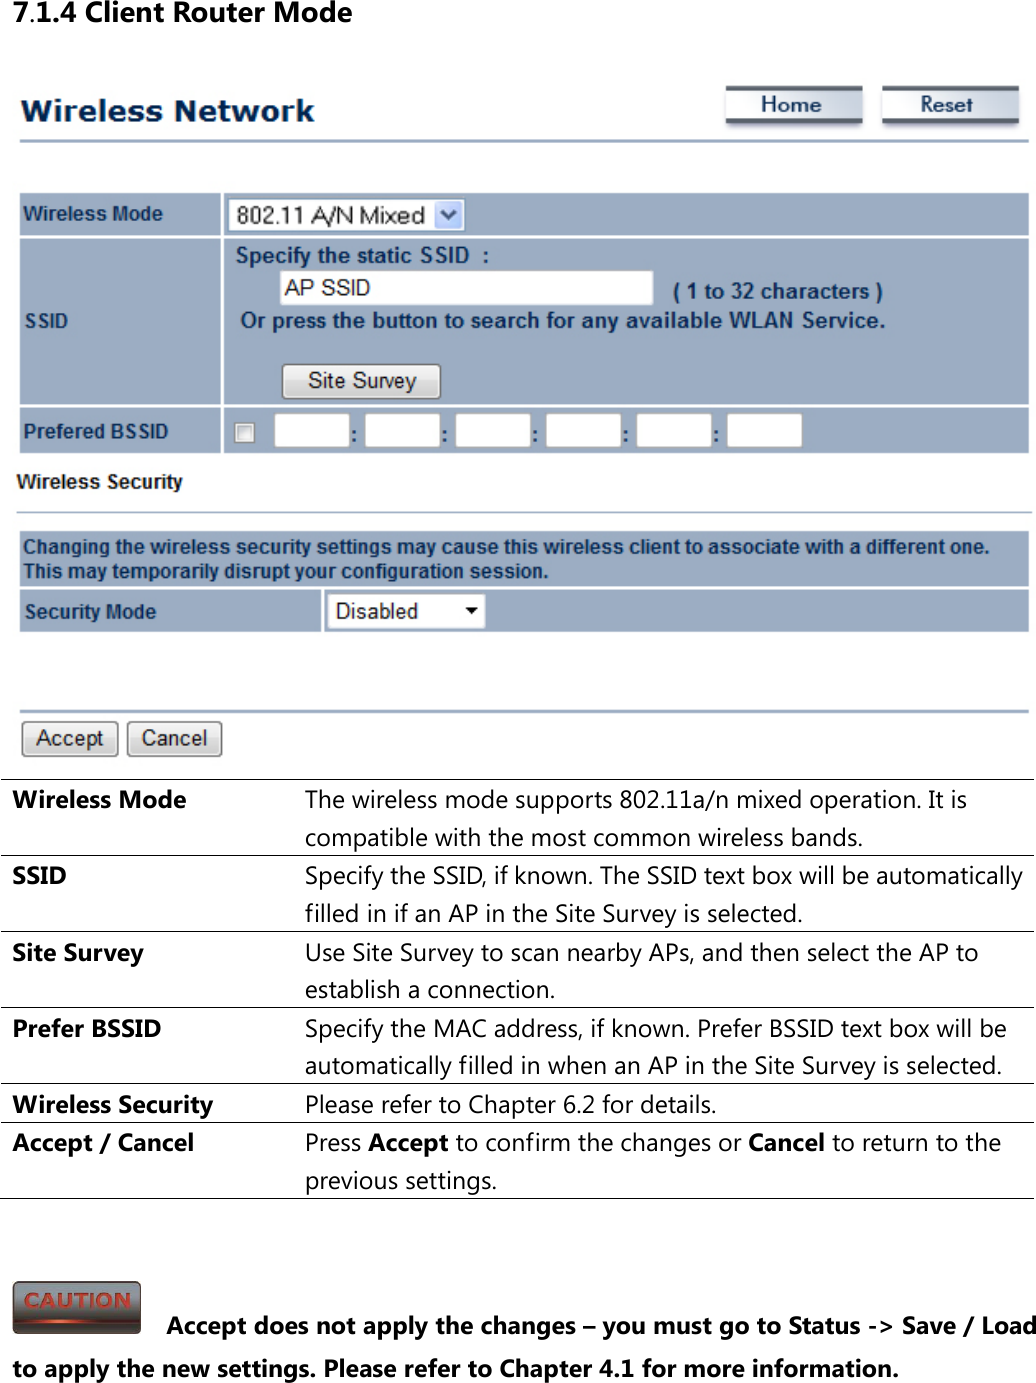 7.1.4 Client Router Mode  Wireless Mode The wireless mode supports 802.11a/n mixed operation. It is compatible with the most common wireless bands. SSID  Specify the SSID, if known. The SSID text box will be automatically filled in if an AP in the Site Survey is selected. Site Survey Use Site Survey to scan nearby APs, and then select the AP to establish a connection. Prefer BSSID Specify the MAC address, if known. Prefer BSSID text box will be automatically filled in when an AP in the Site Survey is selected. Wireless Security Please refer to Chapter 6.2 for details. Accept / Cancel Press Accept to confirm the changes or Cancel to return to the previous settings.     Accept does not apply the changes – you must go to Status -&gt; Save / Load to apply the new settings. Please refer to Chapter 4.1 for more information. 